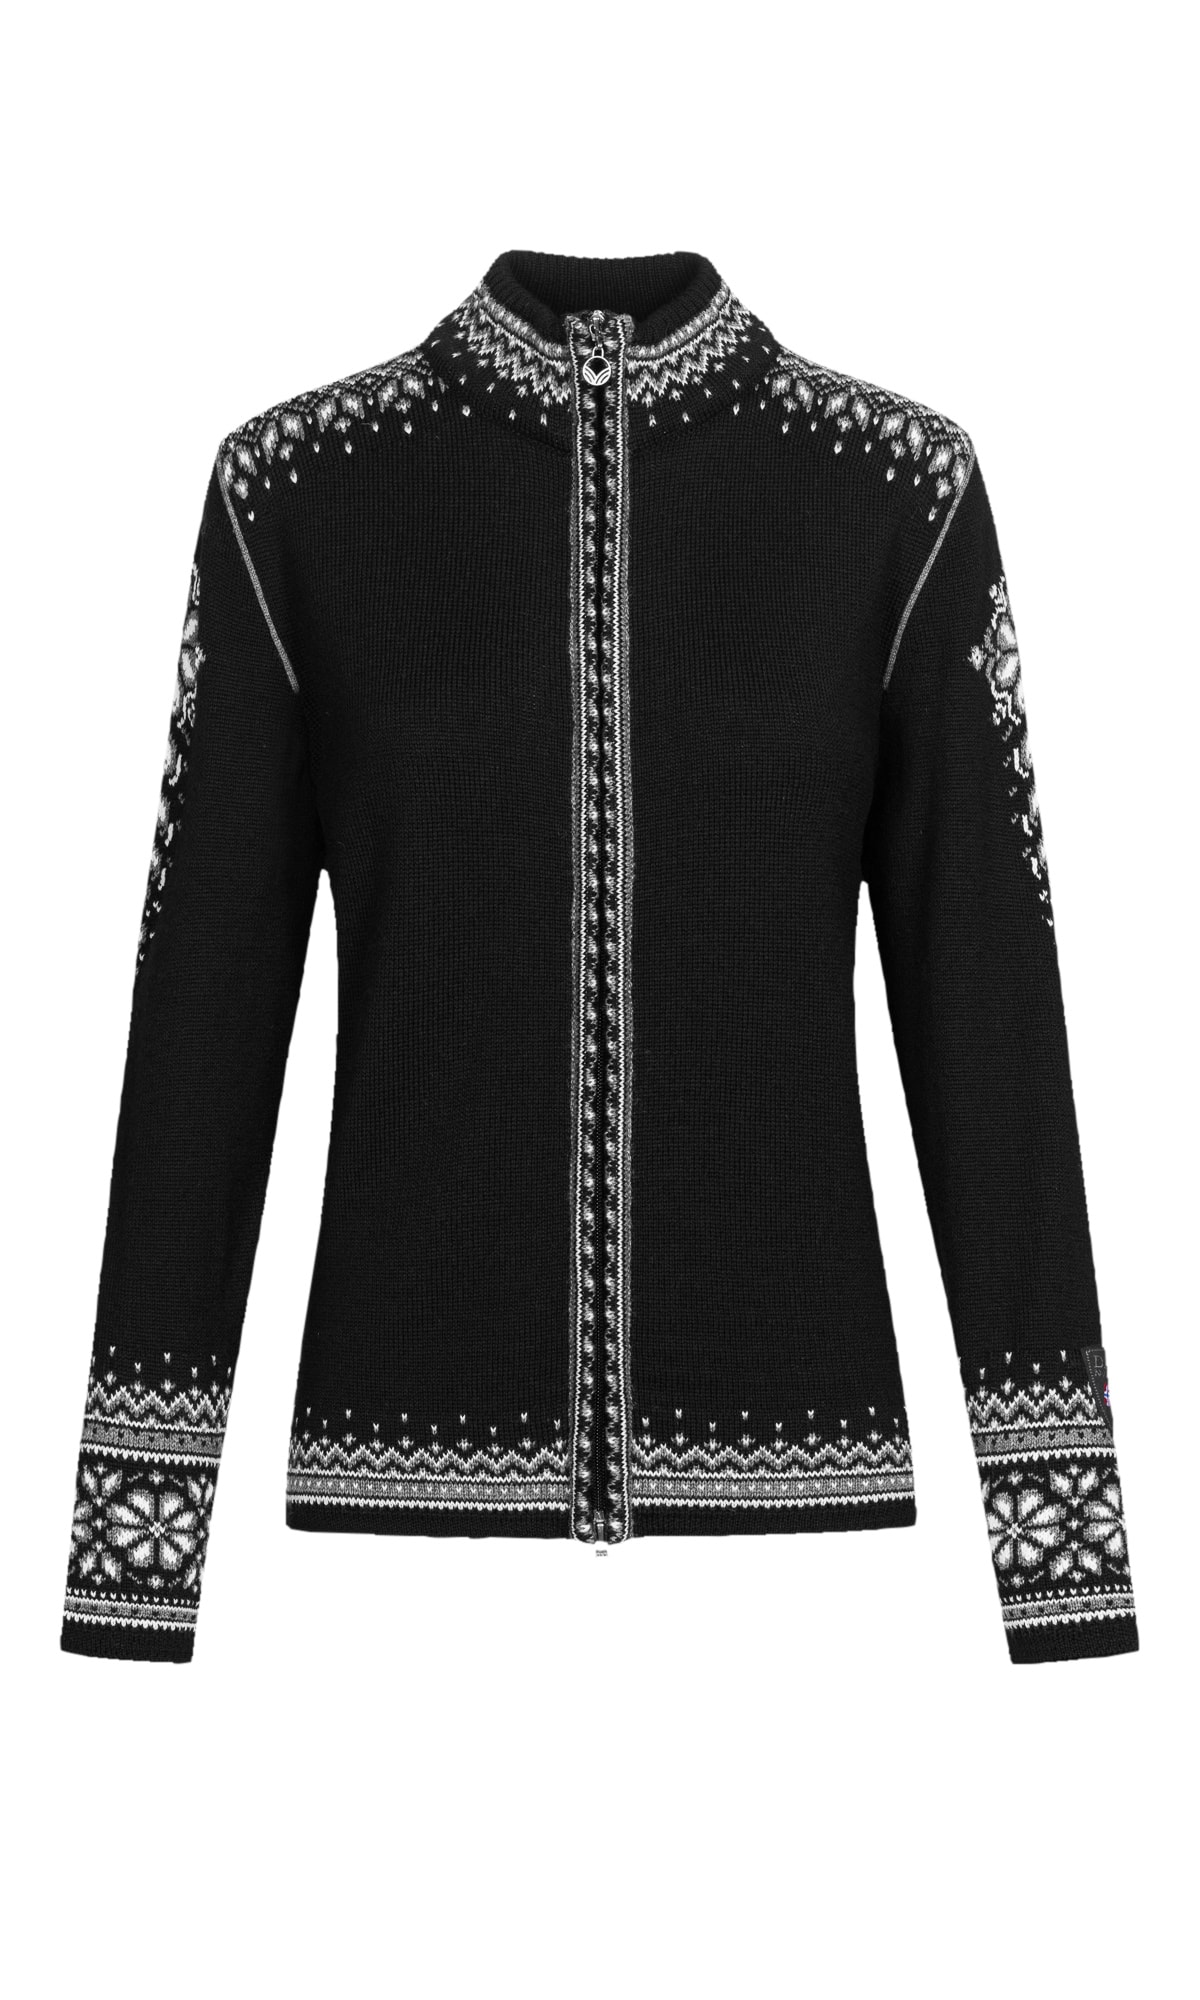 140th Anniversary Jacket - Women - Black - Dale of Norway - Dale